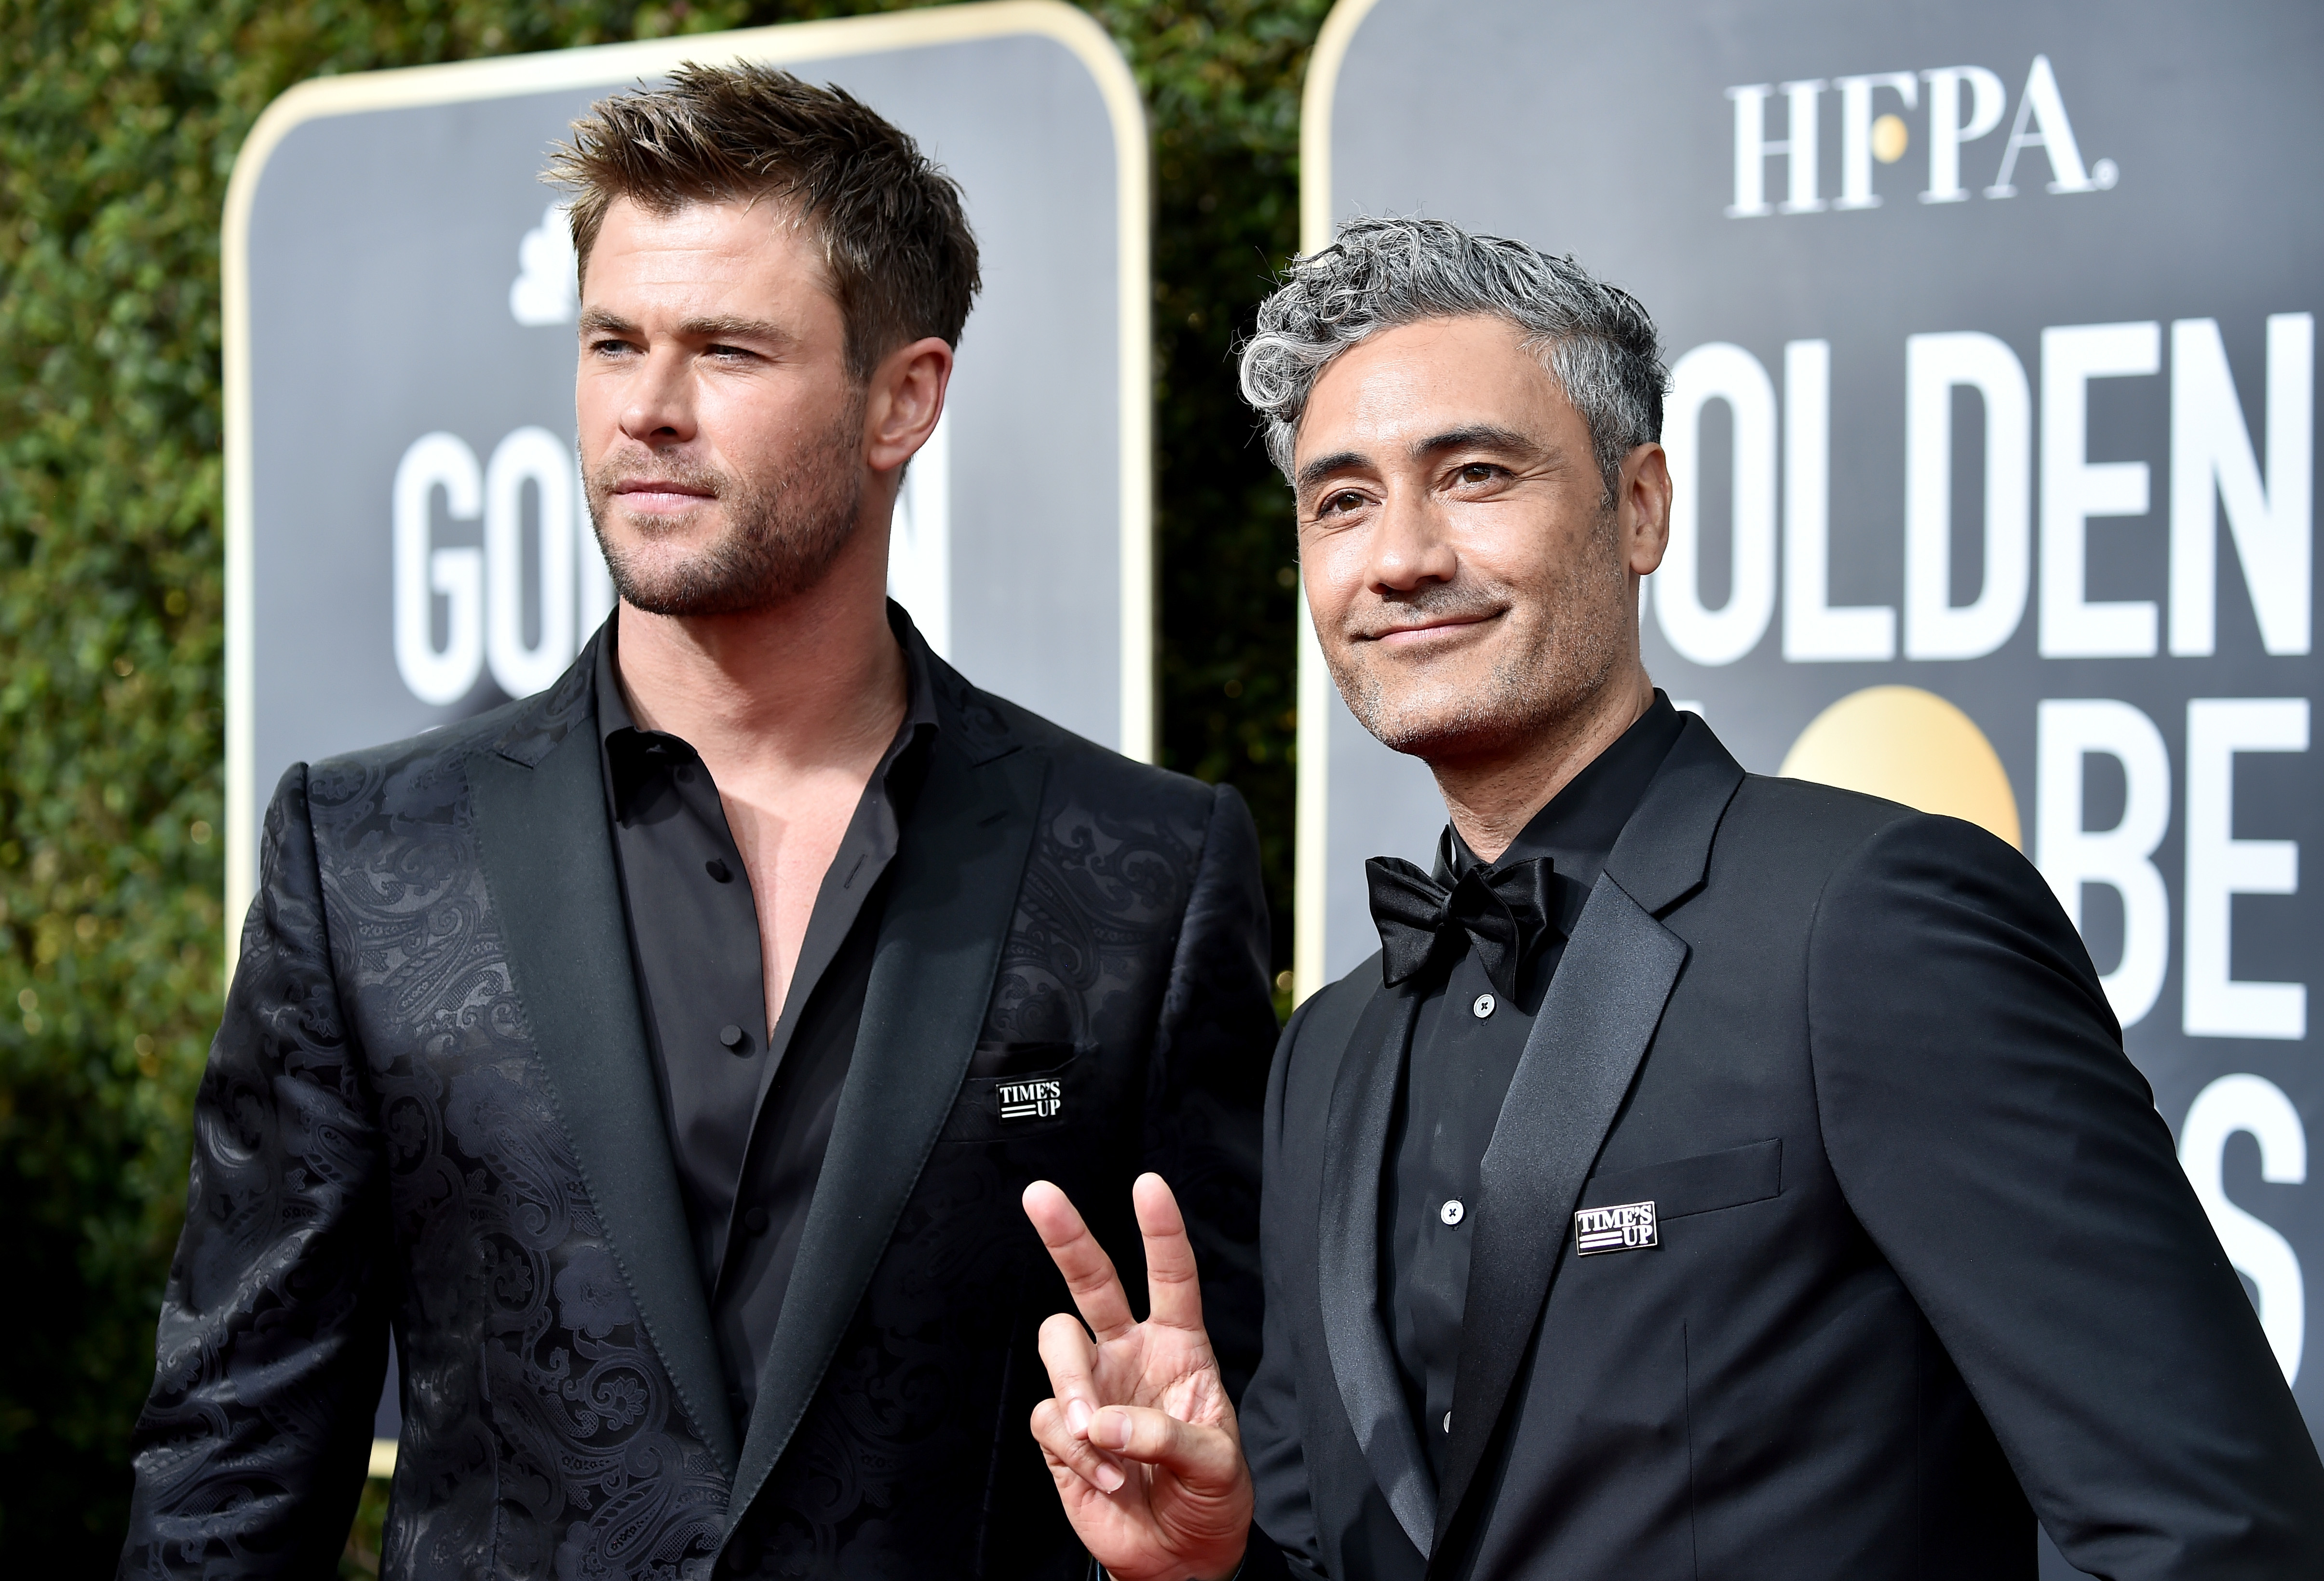 'Thor: Love and Thunder' stars Chris Hemsworth and Taika Waititi pose for pictures together on the red carpet. Hemsworth wears a floral black suit over a black button-up shirt. Waititi wears a black suit over a black button-up shirt and black bow tie.